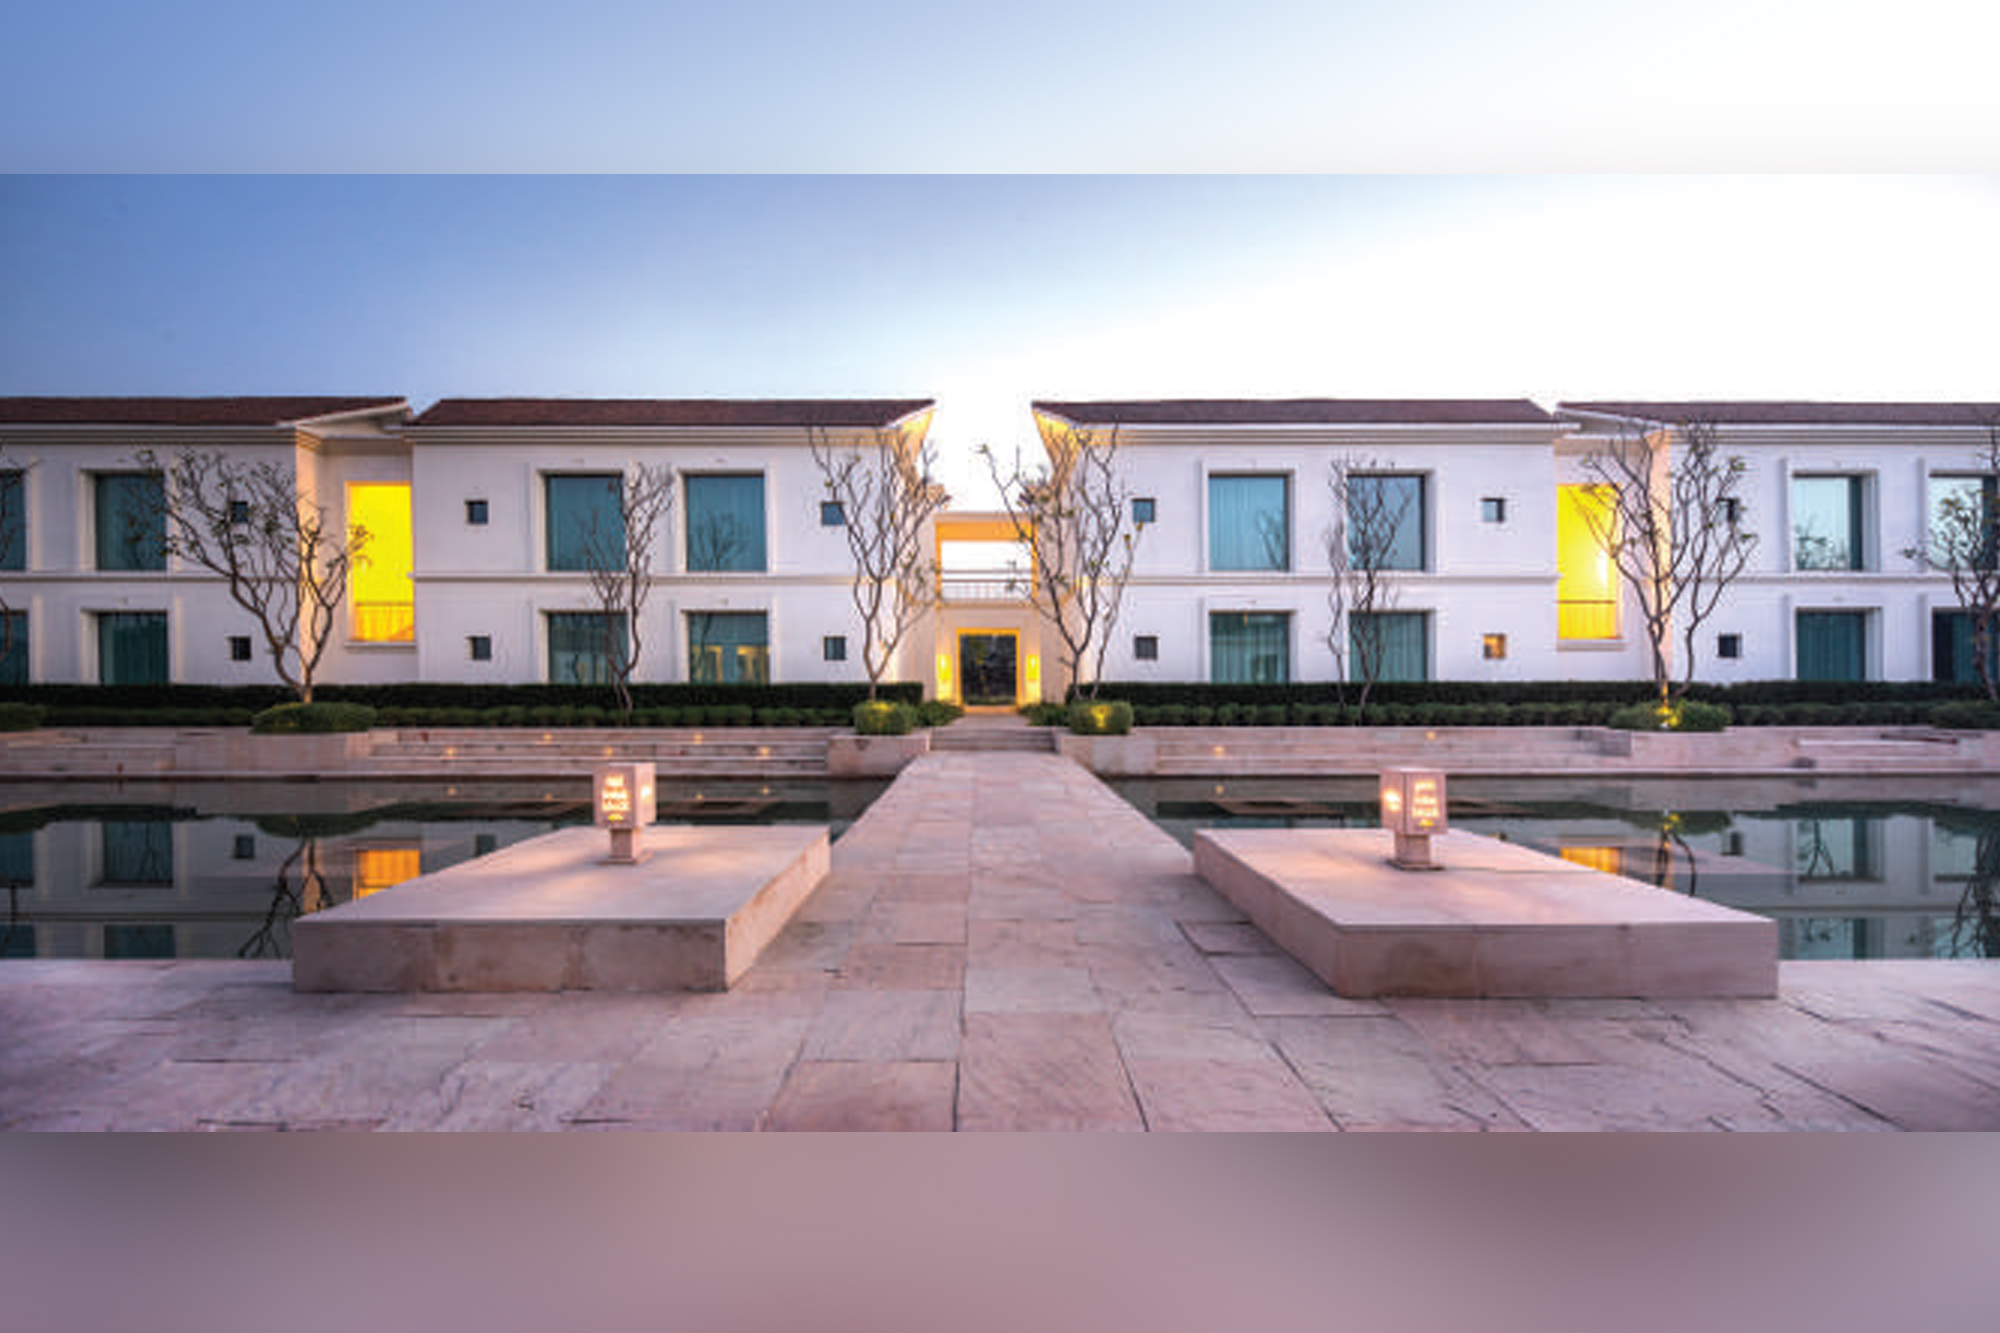 The immersive architecture of the hotel in Bodh Gaya